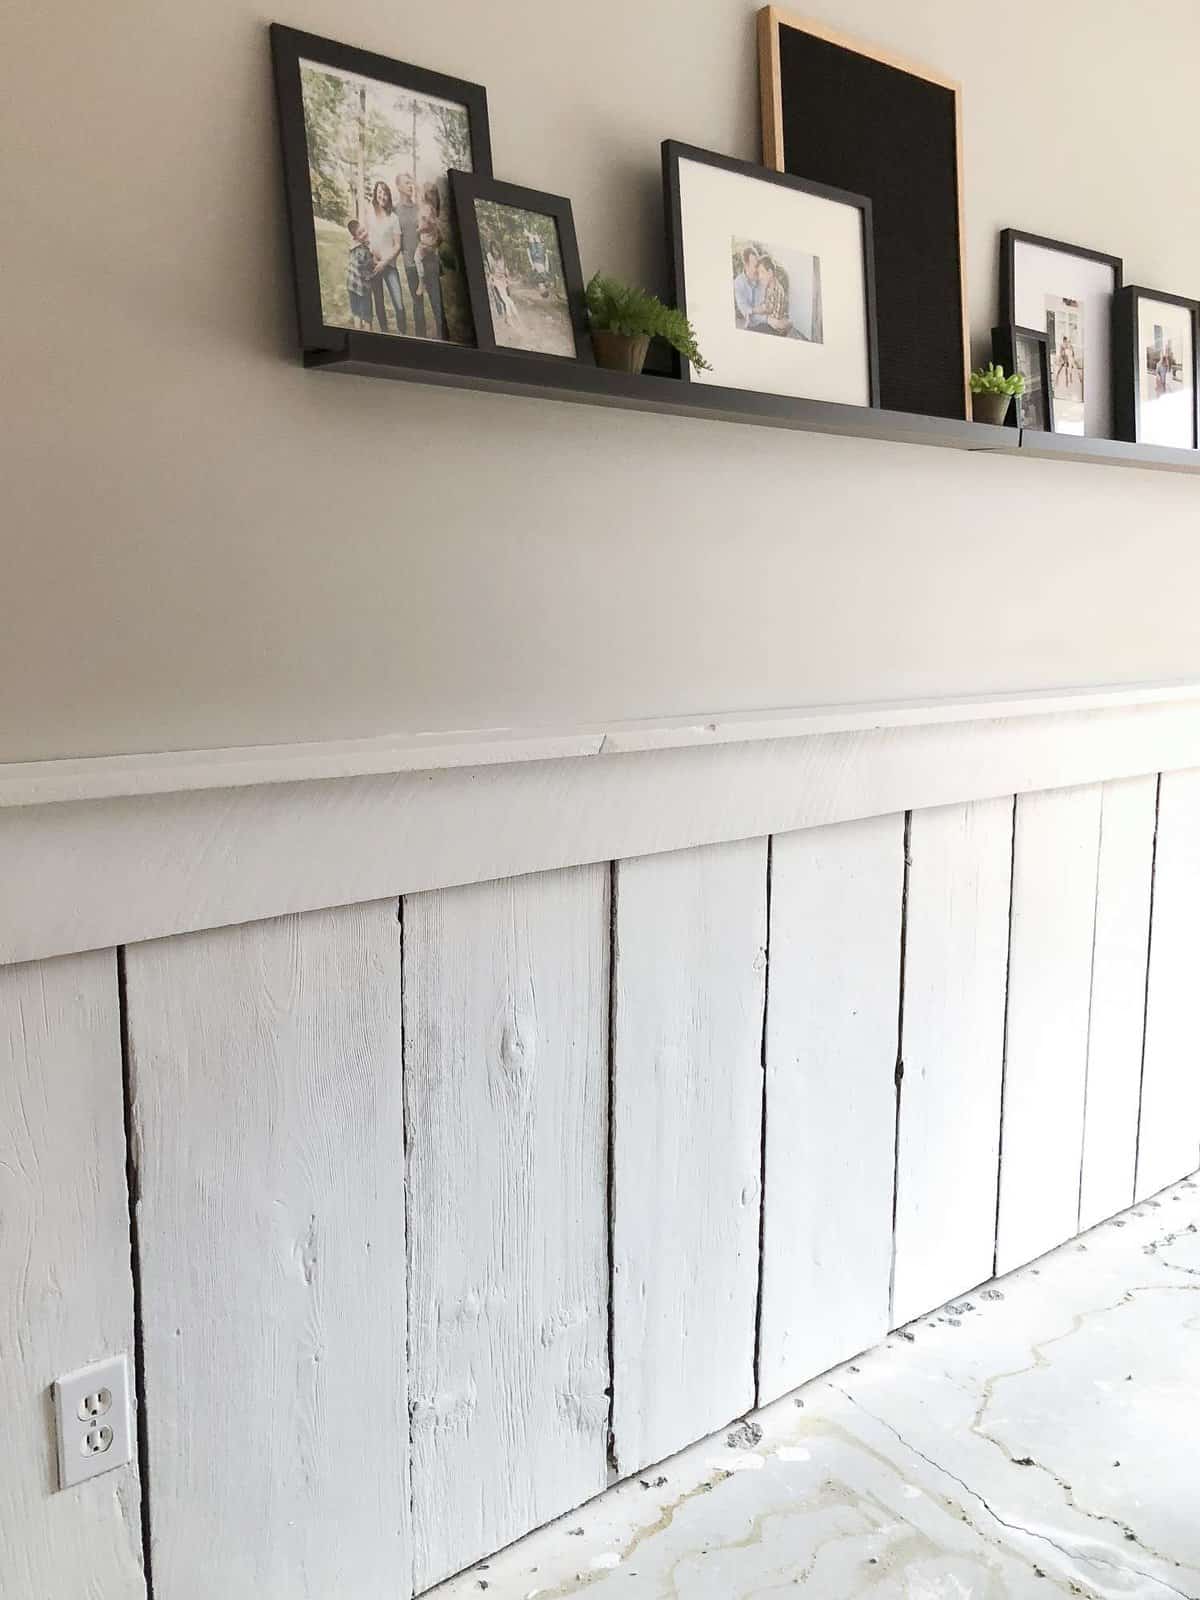 Come see how I took a rustic barnwood wall and transformed it into a more modern accent in our basement remodel for less than $40! #barnwoodwall #diyproject #basementremodel